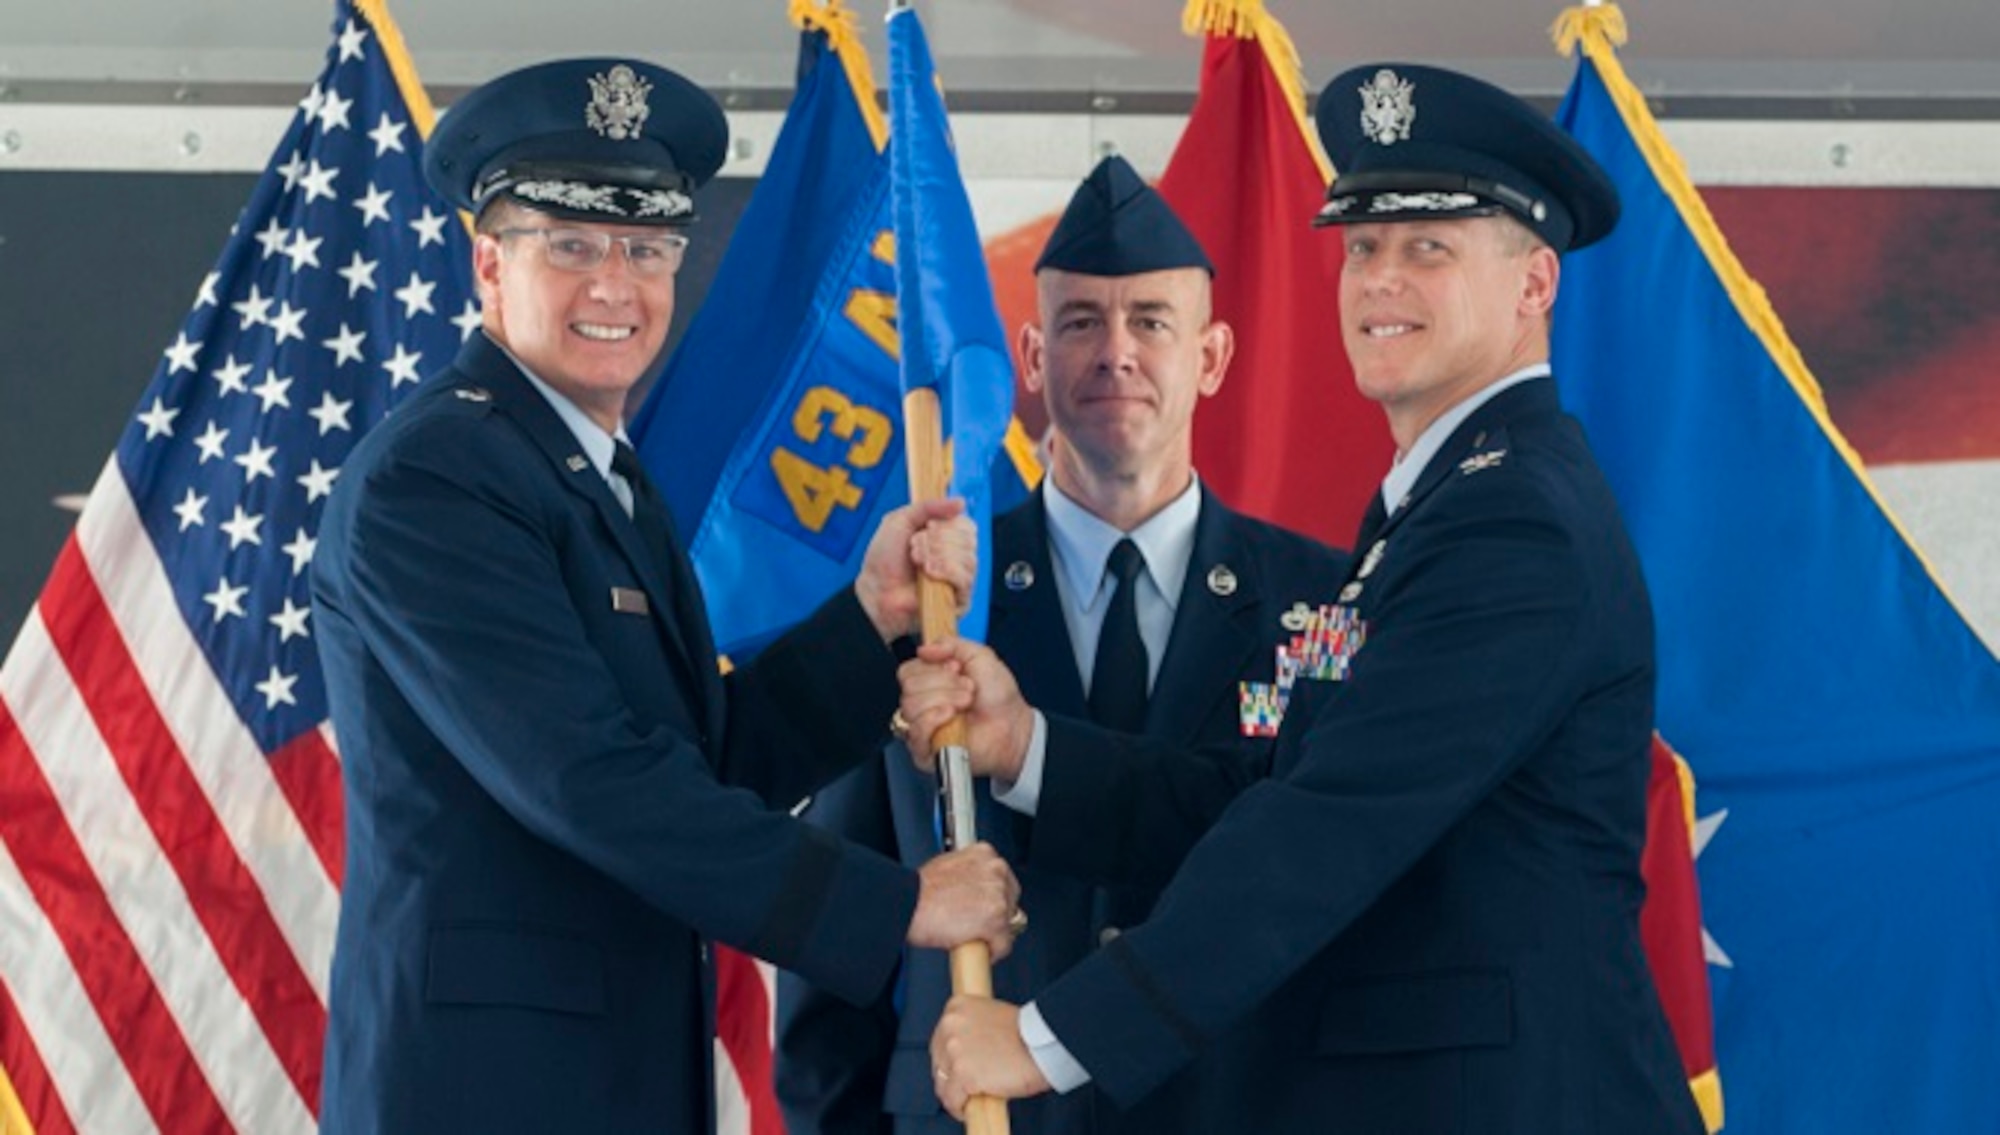 Col. Kelly Holbert accepts the 43d Air Mobility Operations Group guidon from Brig. Gen. James Scanlan during a change-of-command ceremony at Pope Field June 14. Holbert came to Pope from Air Mobility Command headquarters at Scott Air Force Base, Ill, where he served as the chief of the Resource, Requirements and Readiness Division. He took command of the group here, formerly named the 43d Airlift Group, after it was redesignated as the 43d AMOG during the ceremony. General Scanlan is the mobilization assistant to the commander of the U.S. Air Force Expeditionary Center at Joint Base McGuire-Lakehurst, N.J. (U.S. Air Force photo/Marc Barnes)